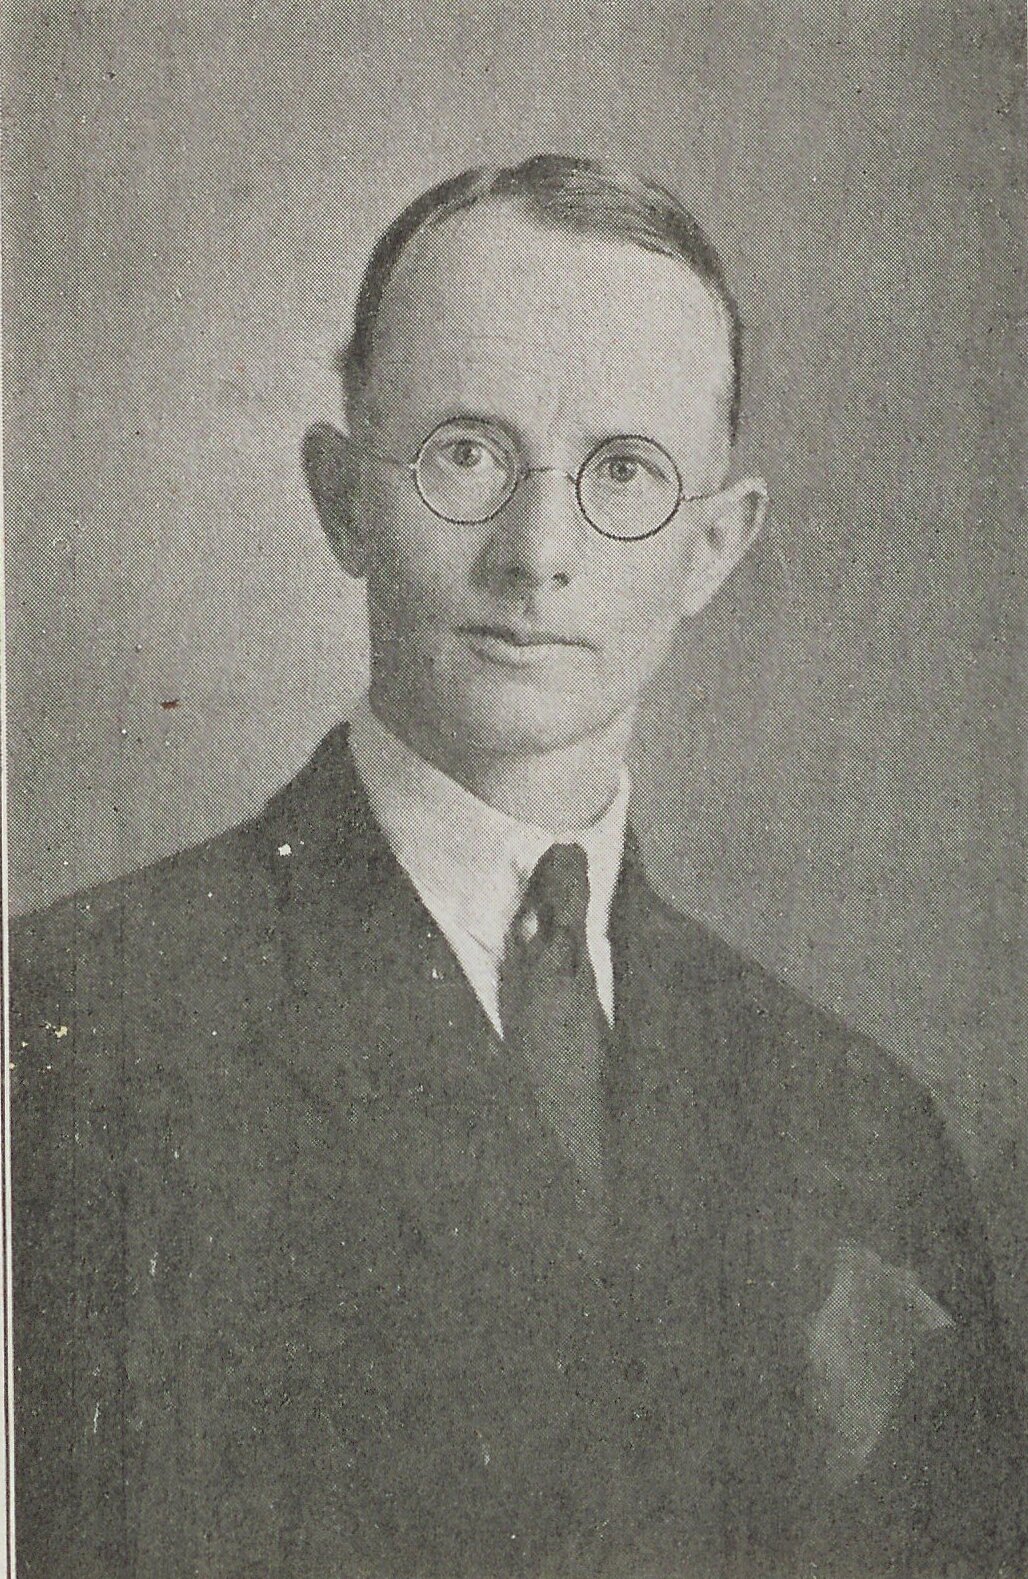 Portrait from “Indian Wild Life” (1936) which he edited